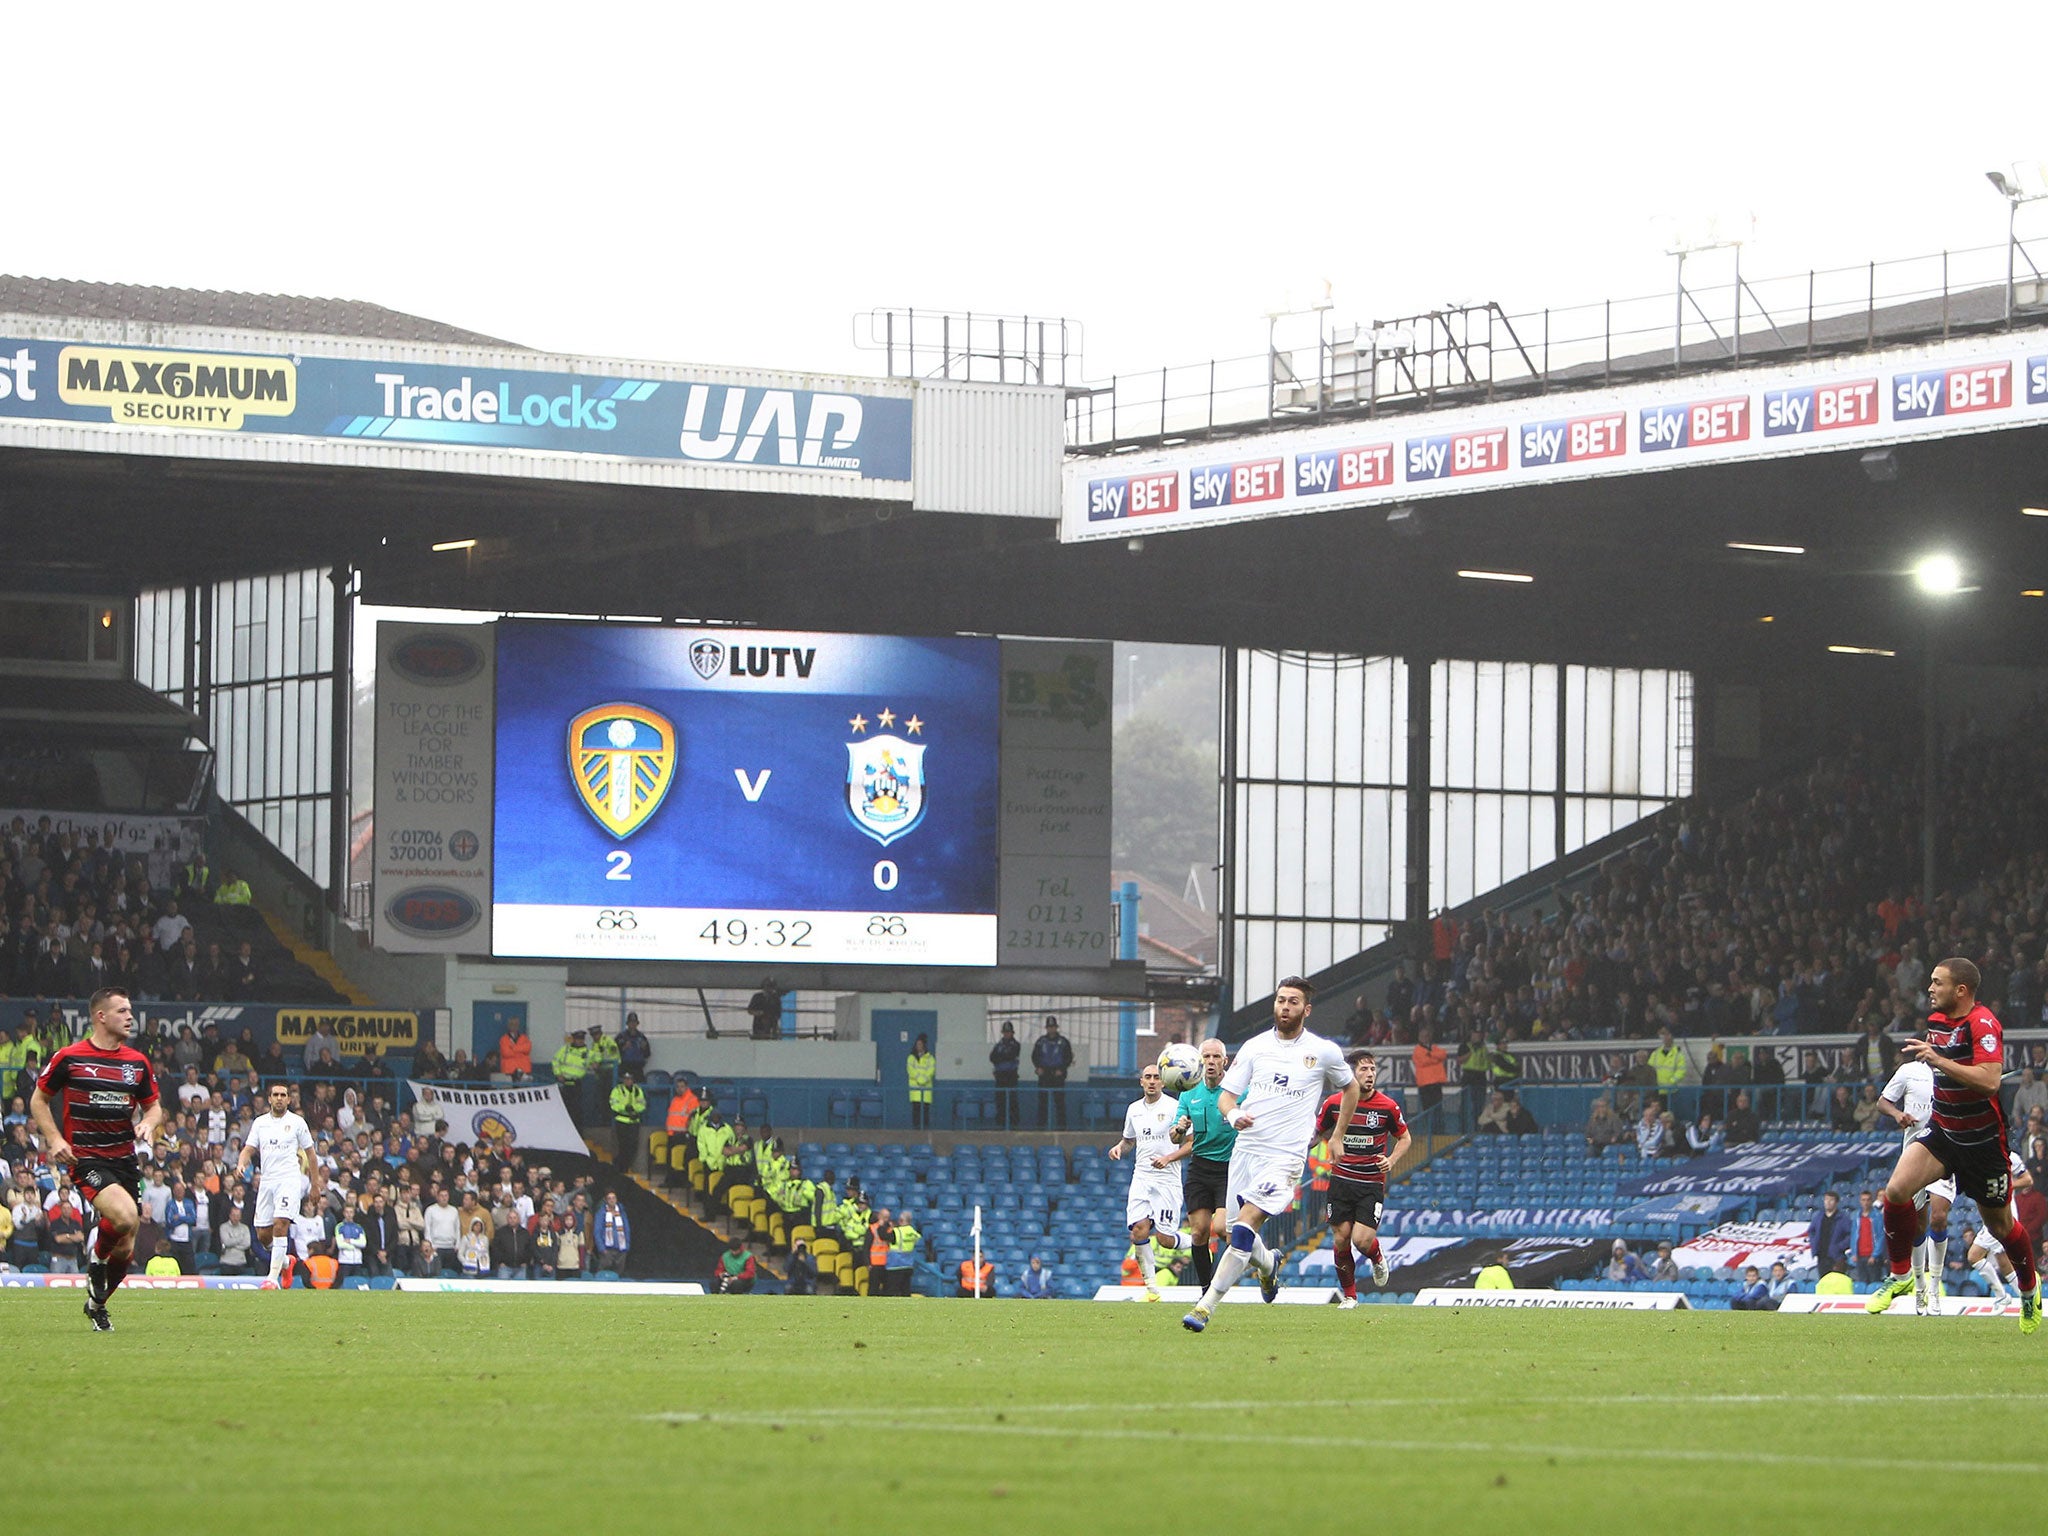 A view of Elland Road during Leed's 3-0 win over Huddersfield